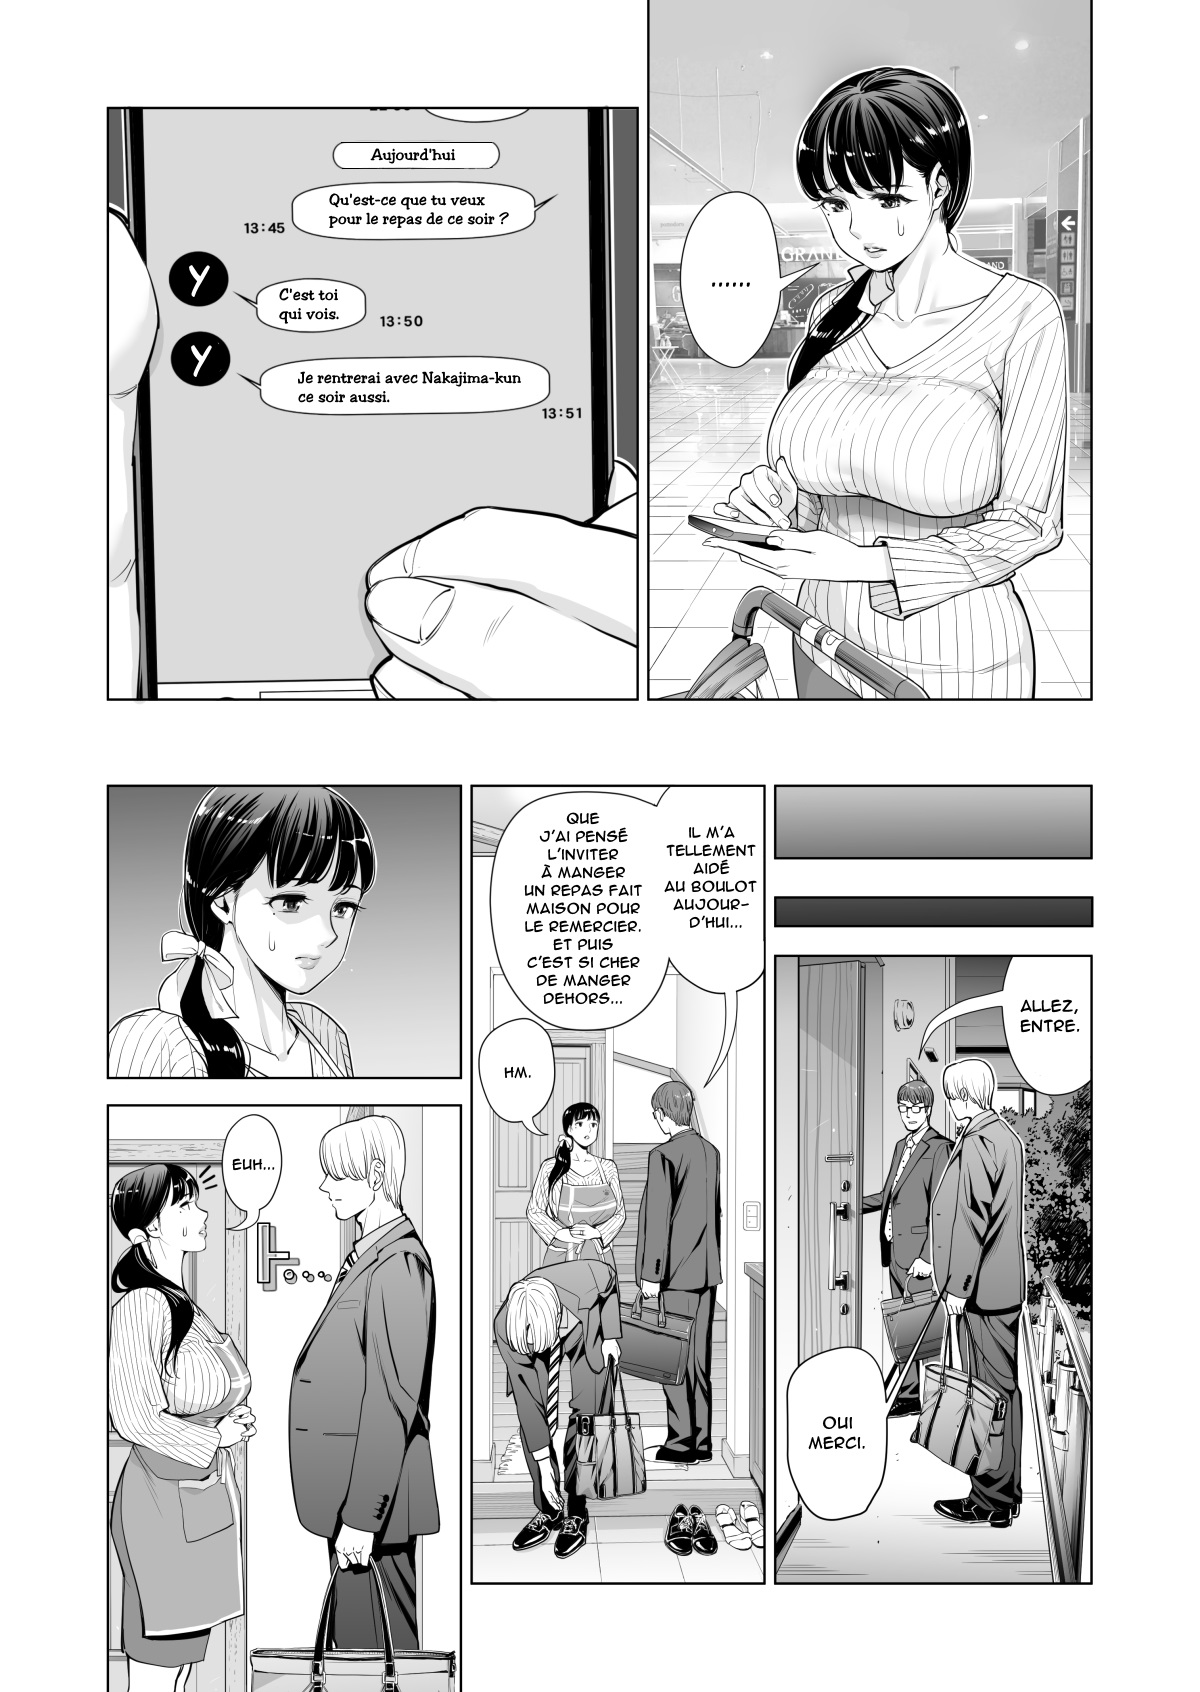 Tsukiyo no Midare Zake  Moonlit Intoxication ~ A Housewife Stolen by a Coworker Besides her Blackout Drunk Husband ~ Chapter 1 numero d'image 20